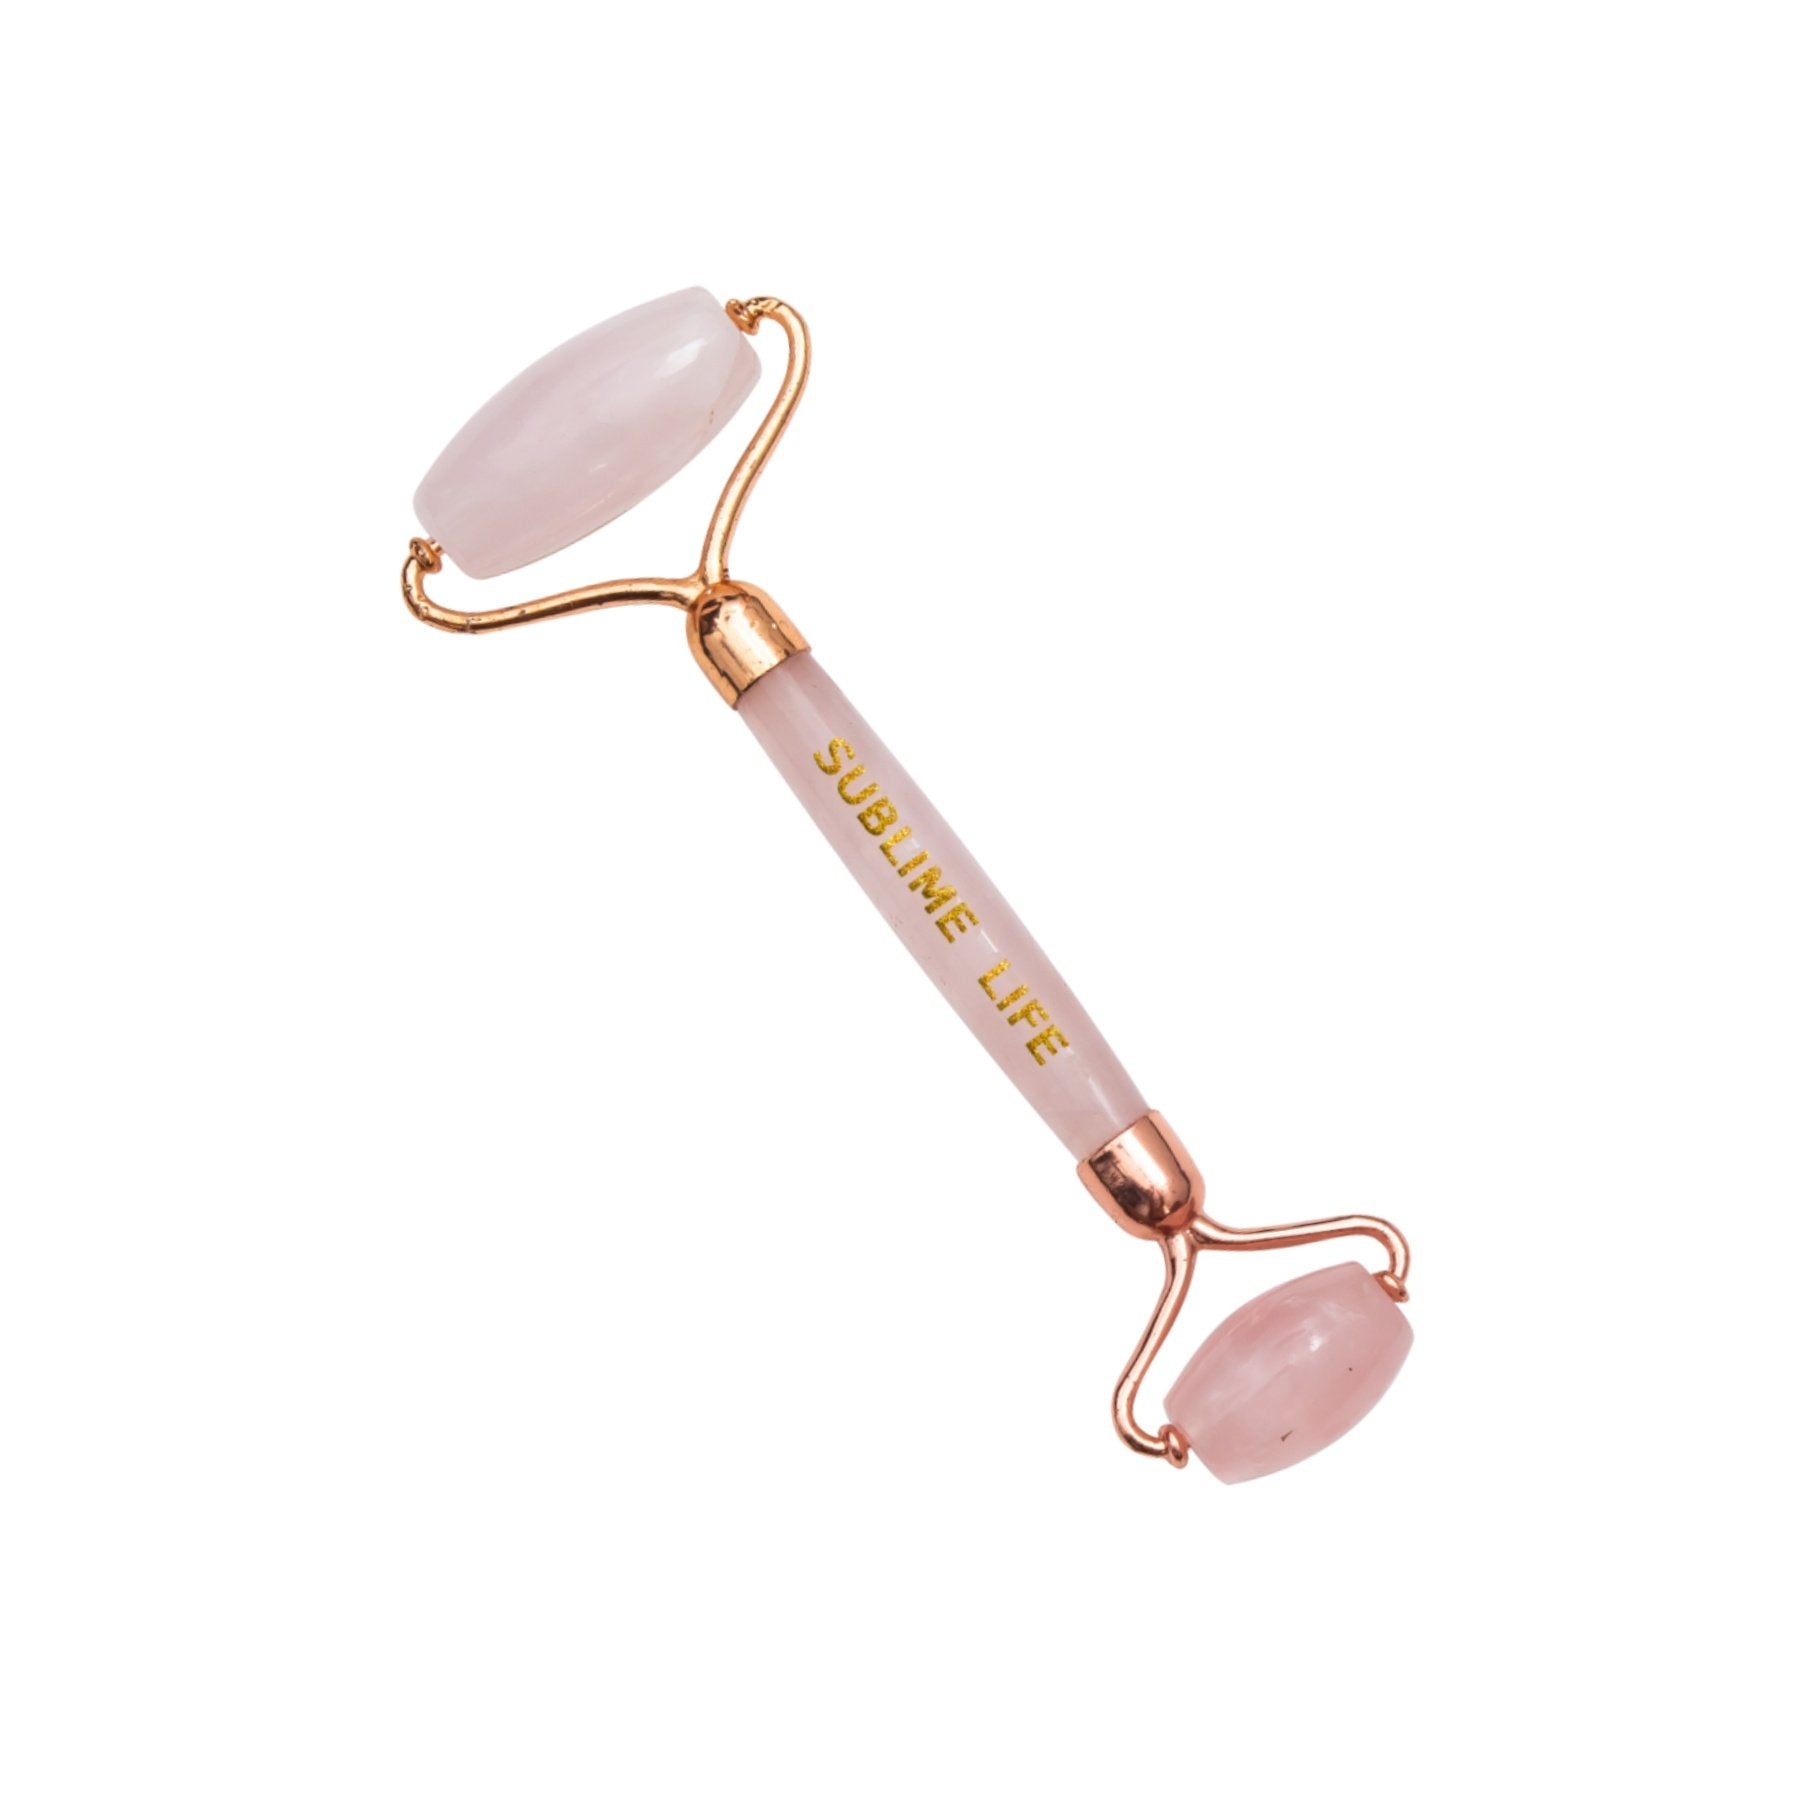 Shop Rose Quartz Roller on SublimeLife.in. Best for re-energising your skin giving it a glow.